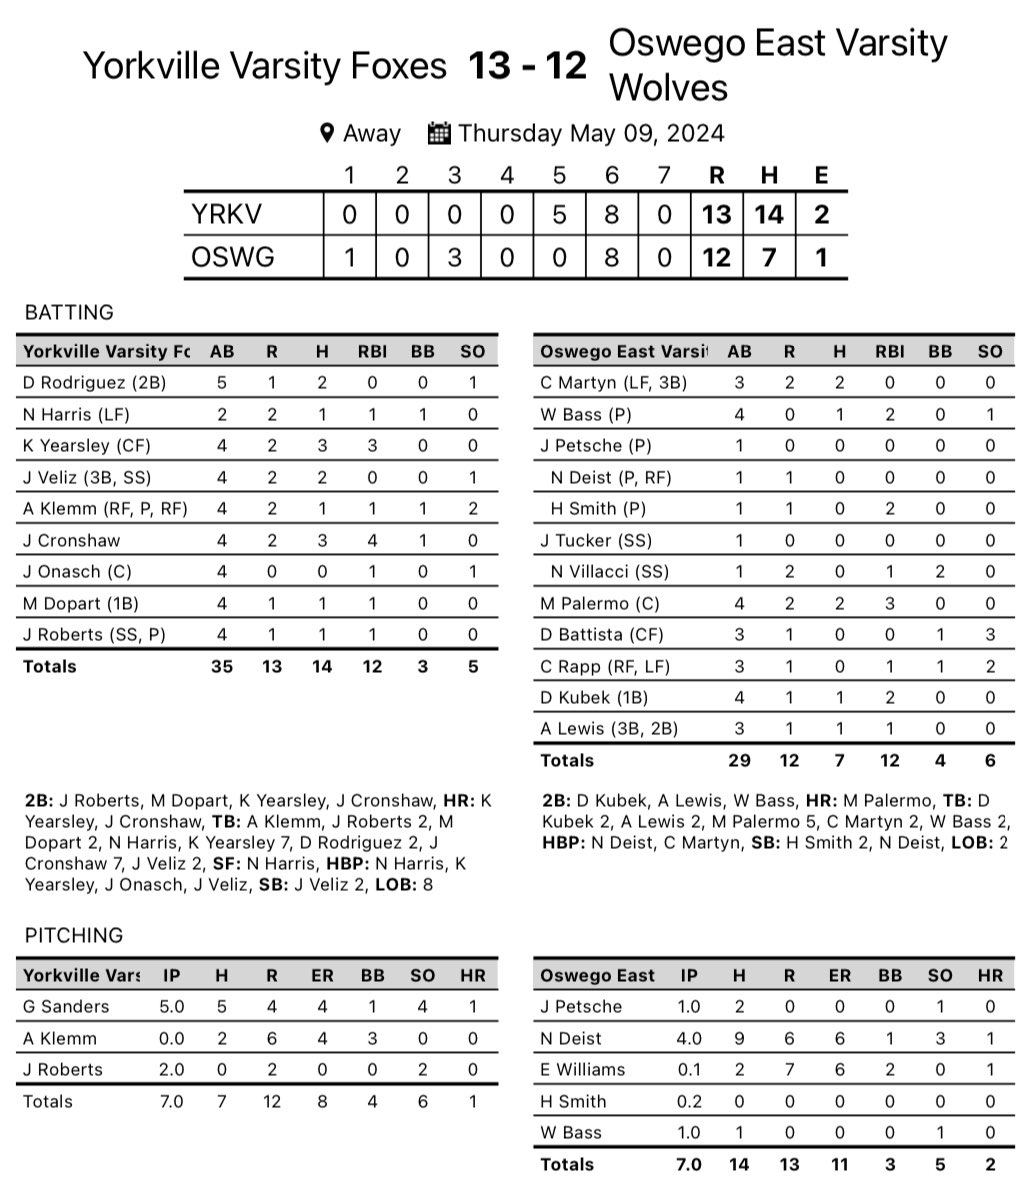 The Foxes (17-10, 9-3) had an interesting 24hrs. After a failed attempt to play in the rain yesterday, we managed to hang on following some late inning shenanigans. Credit OE fighting! @gabesanderss: 5IP, 4K @KameronYearsley: 3-4, 2B, HR, 3RBI @jakecronfoxes: 3-4, 2B, HR, 4RBI